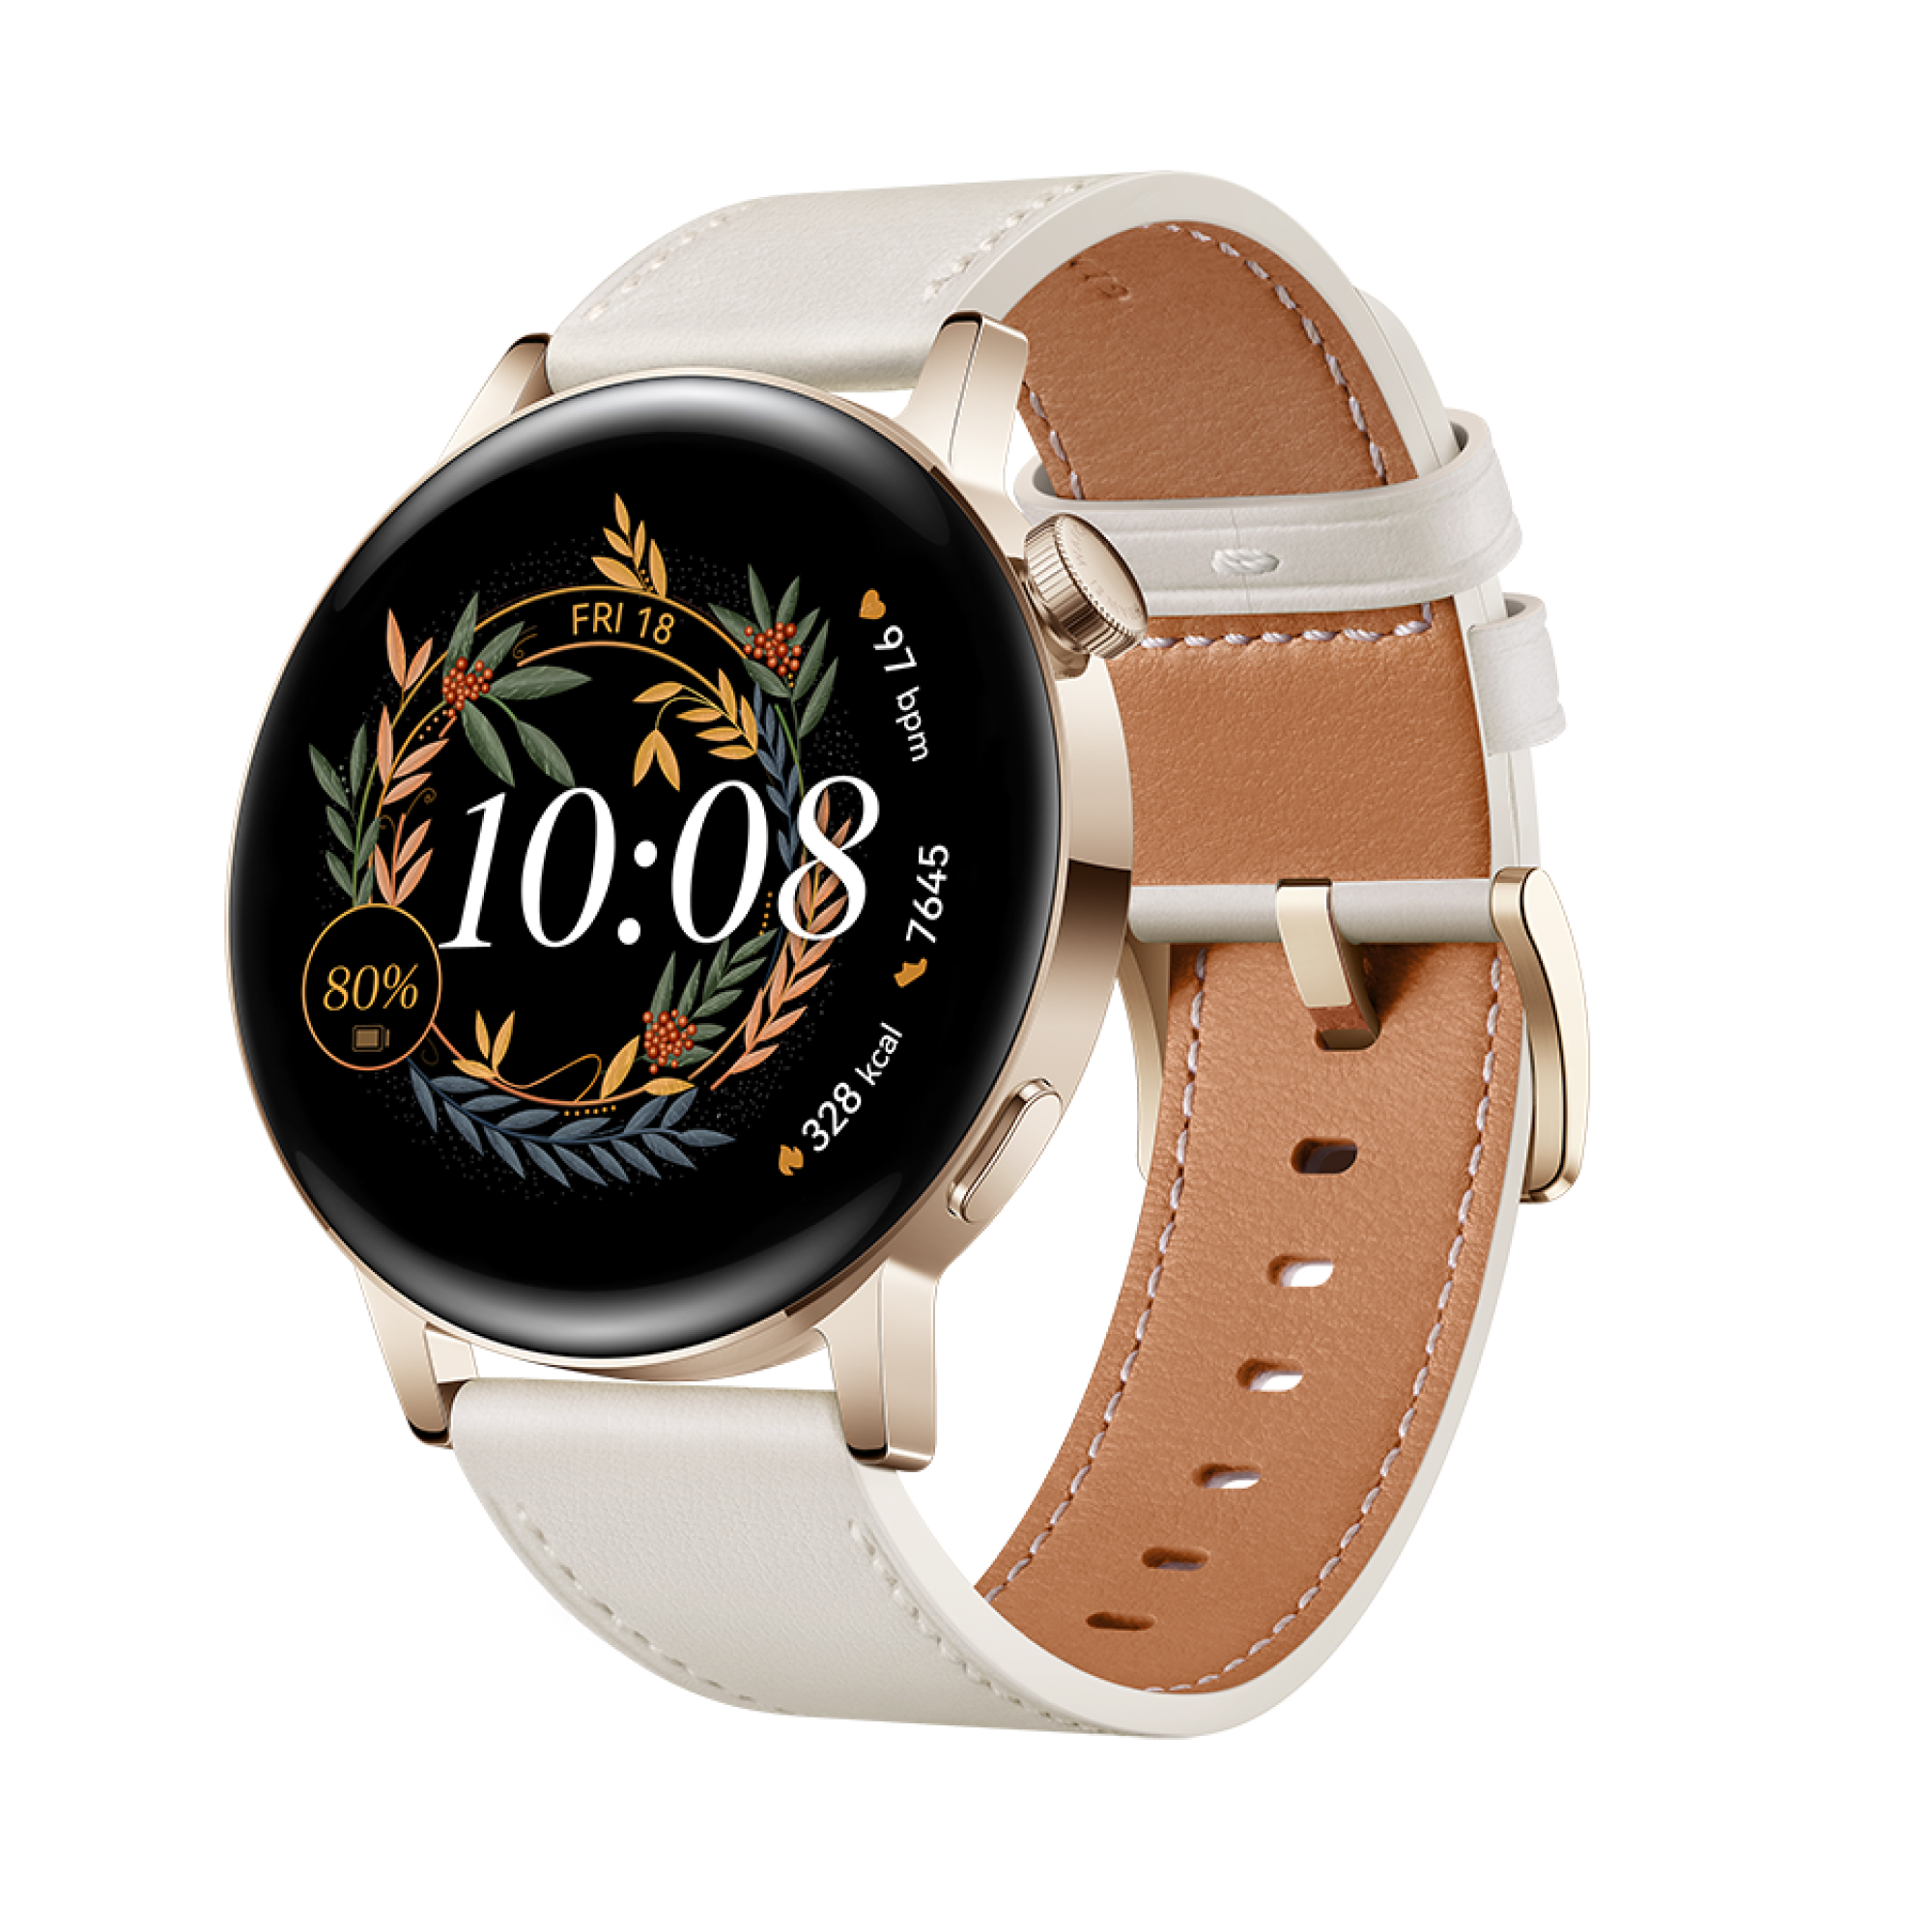 Huawei gt 3 gold ss. Смарт-часы Huawei gt 3 mil-b19 Gold SS / White Leather. Huawei watch gt 3 42mm Gold. Huawei watch gt3 42mm. Huawei watch gt 3 Elegant 42mm.